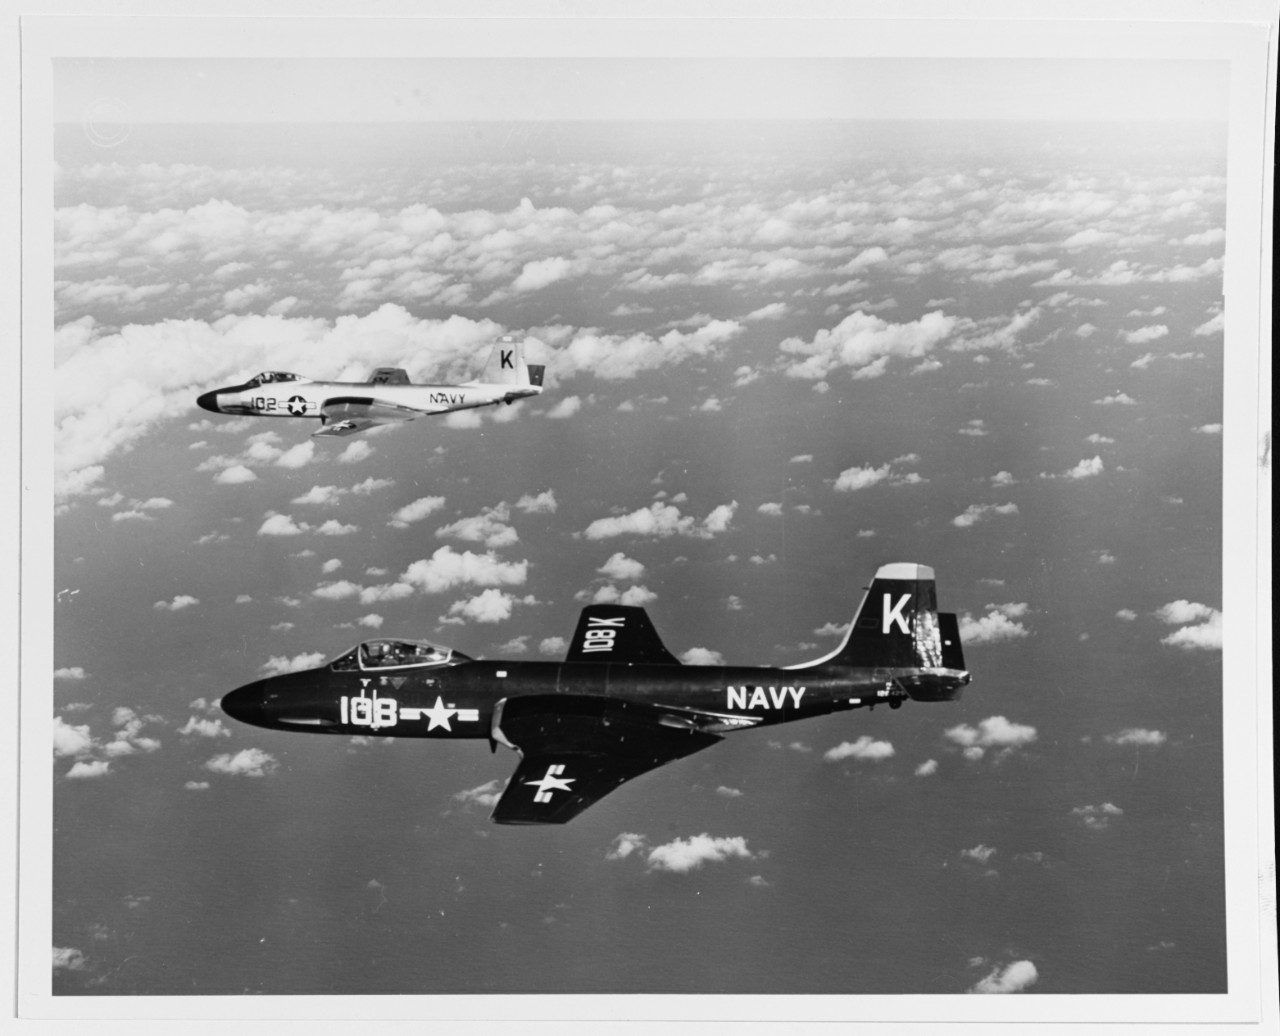 McDonnell F2H-3 "Banshee" fighters